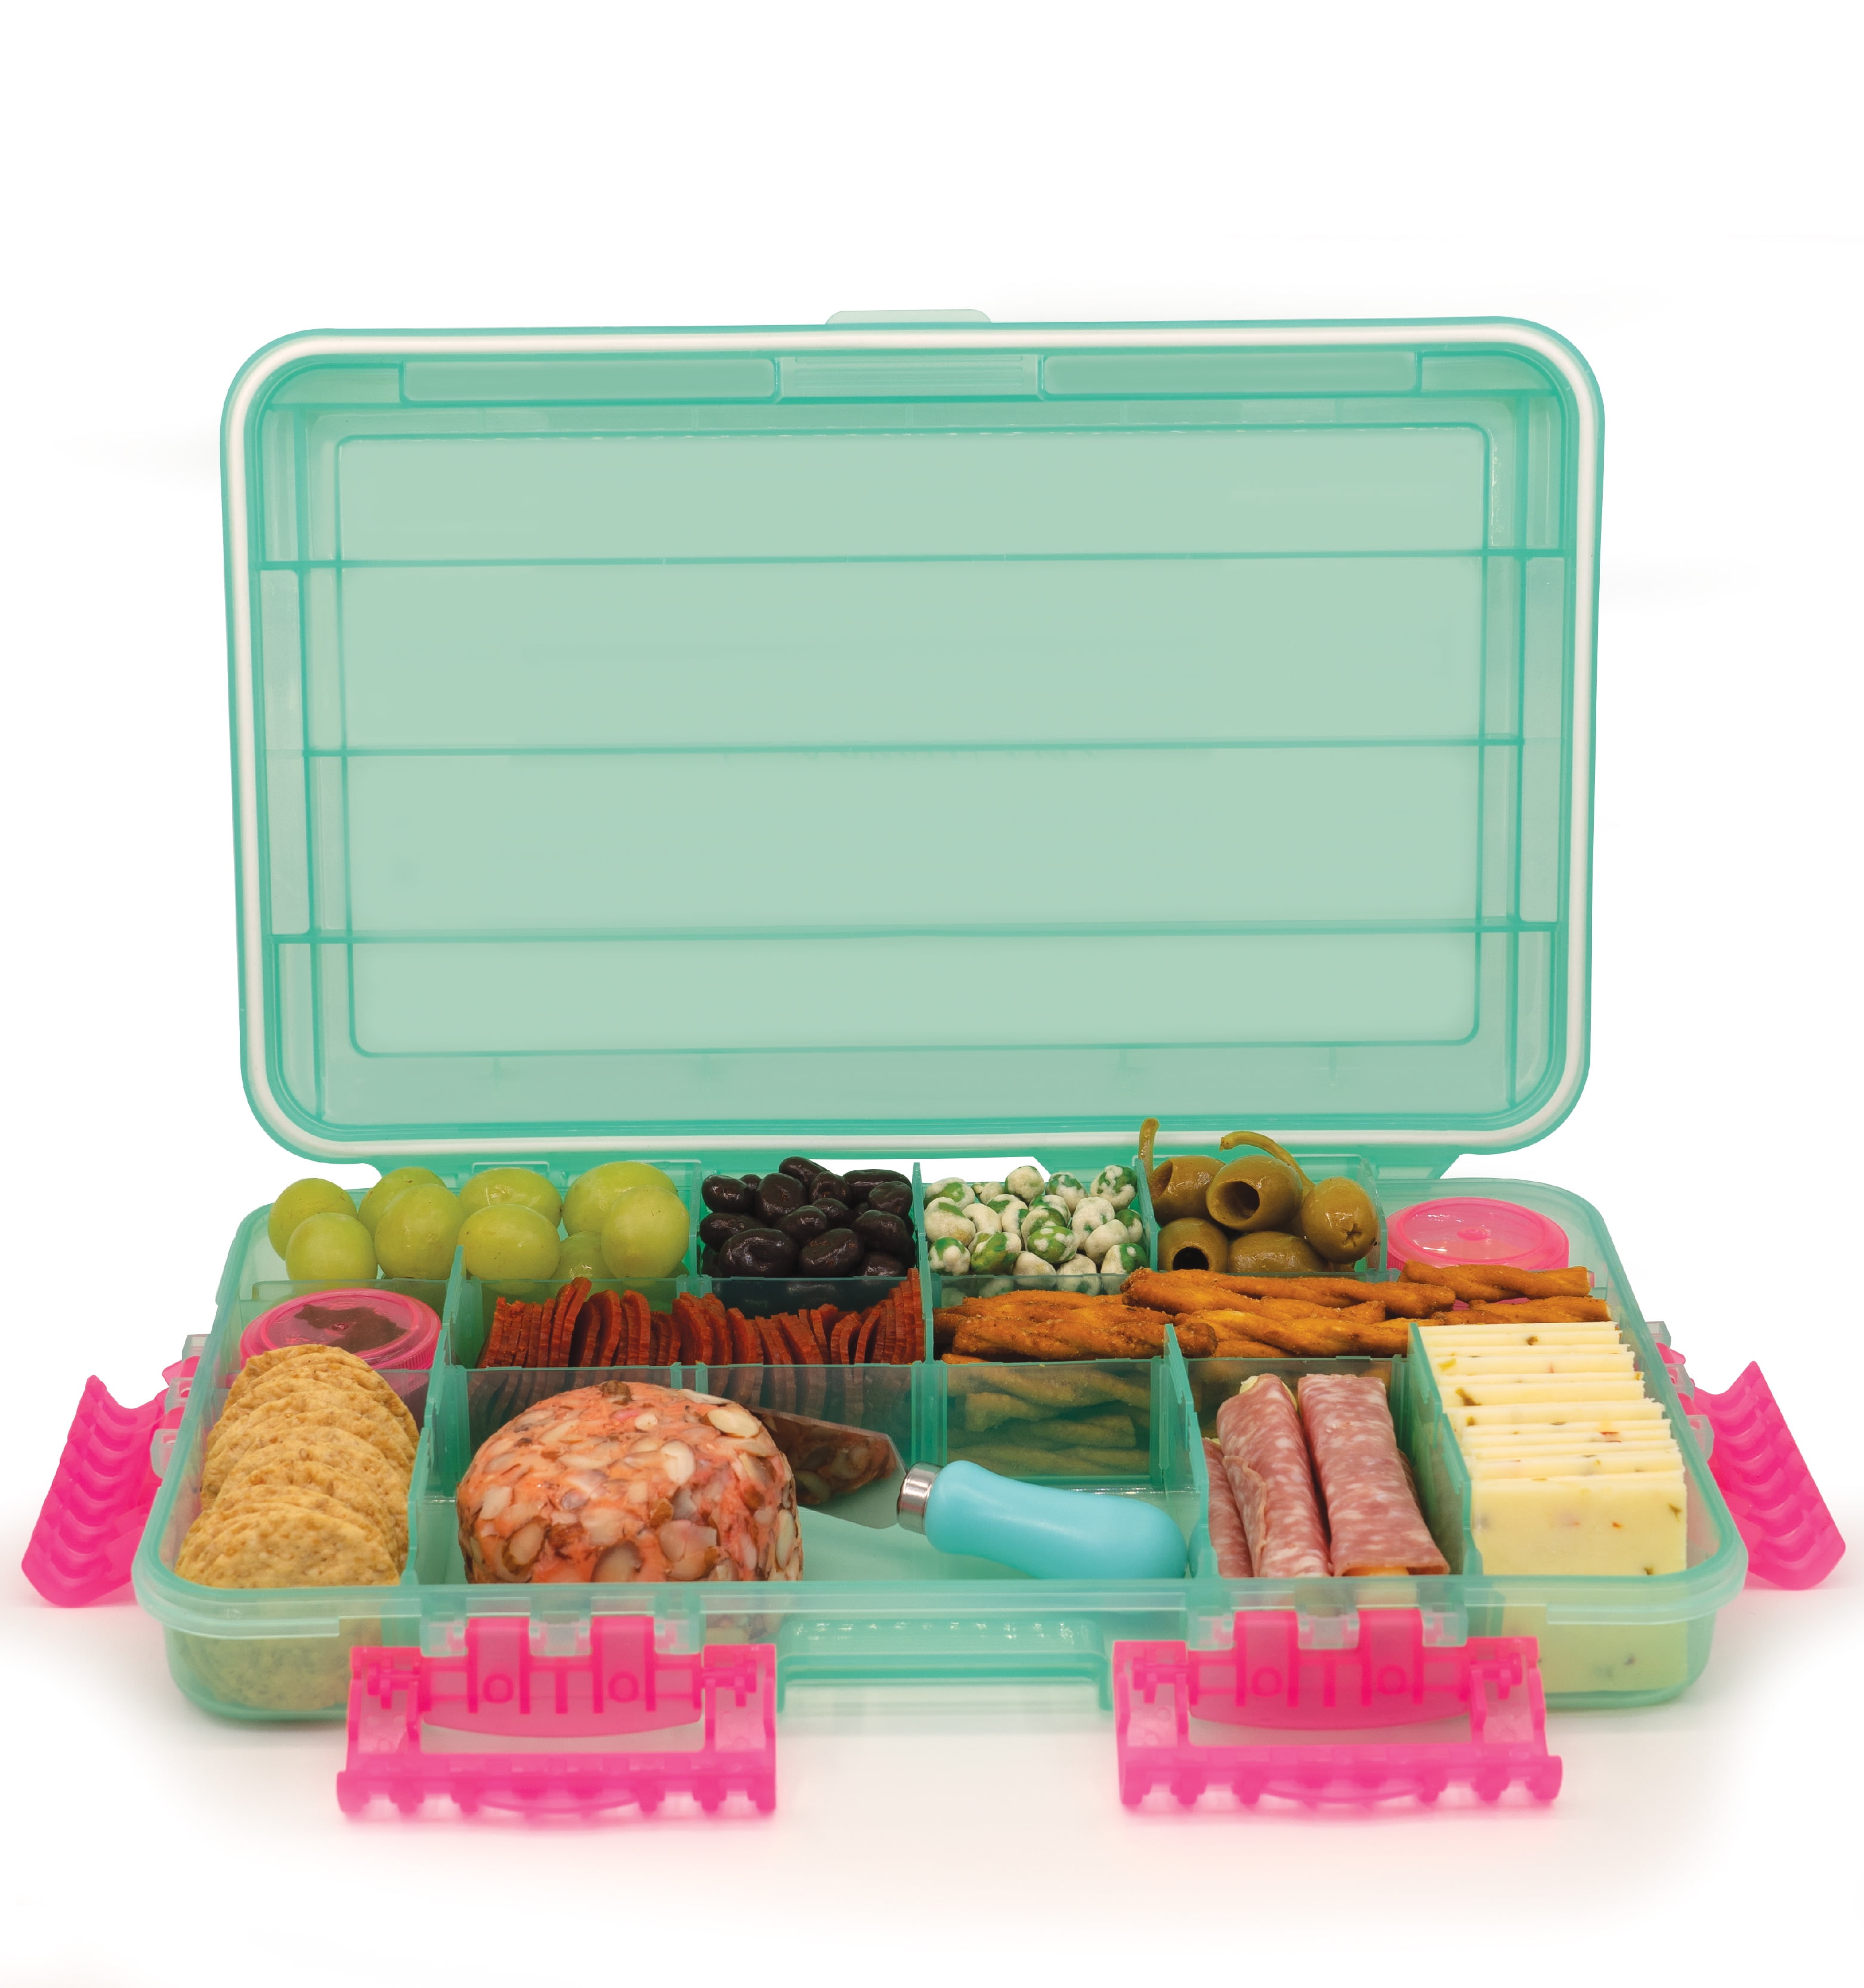 Personalized Snackle Box BPA Free, Charcutterie Box, Snack Box